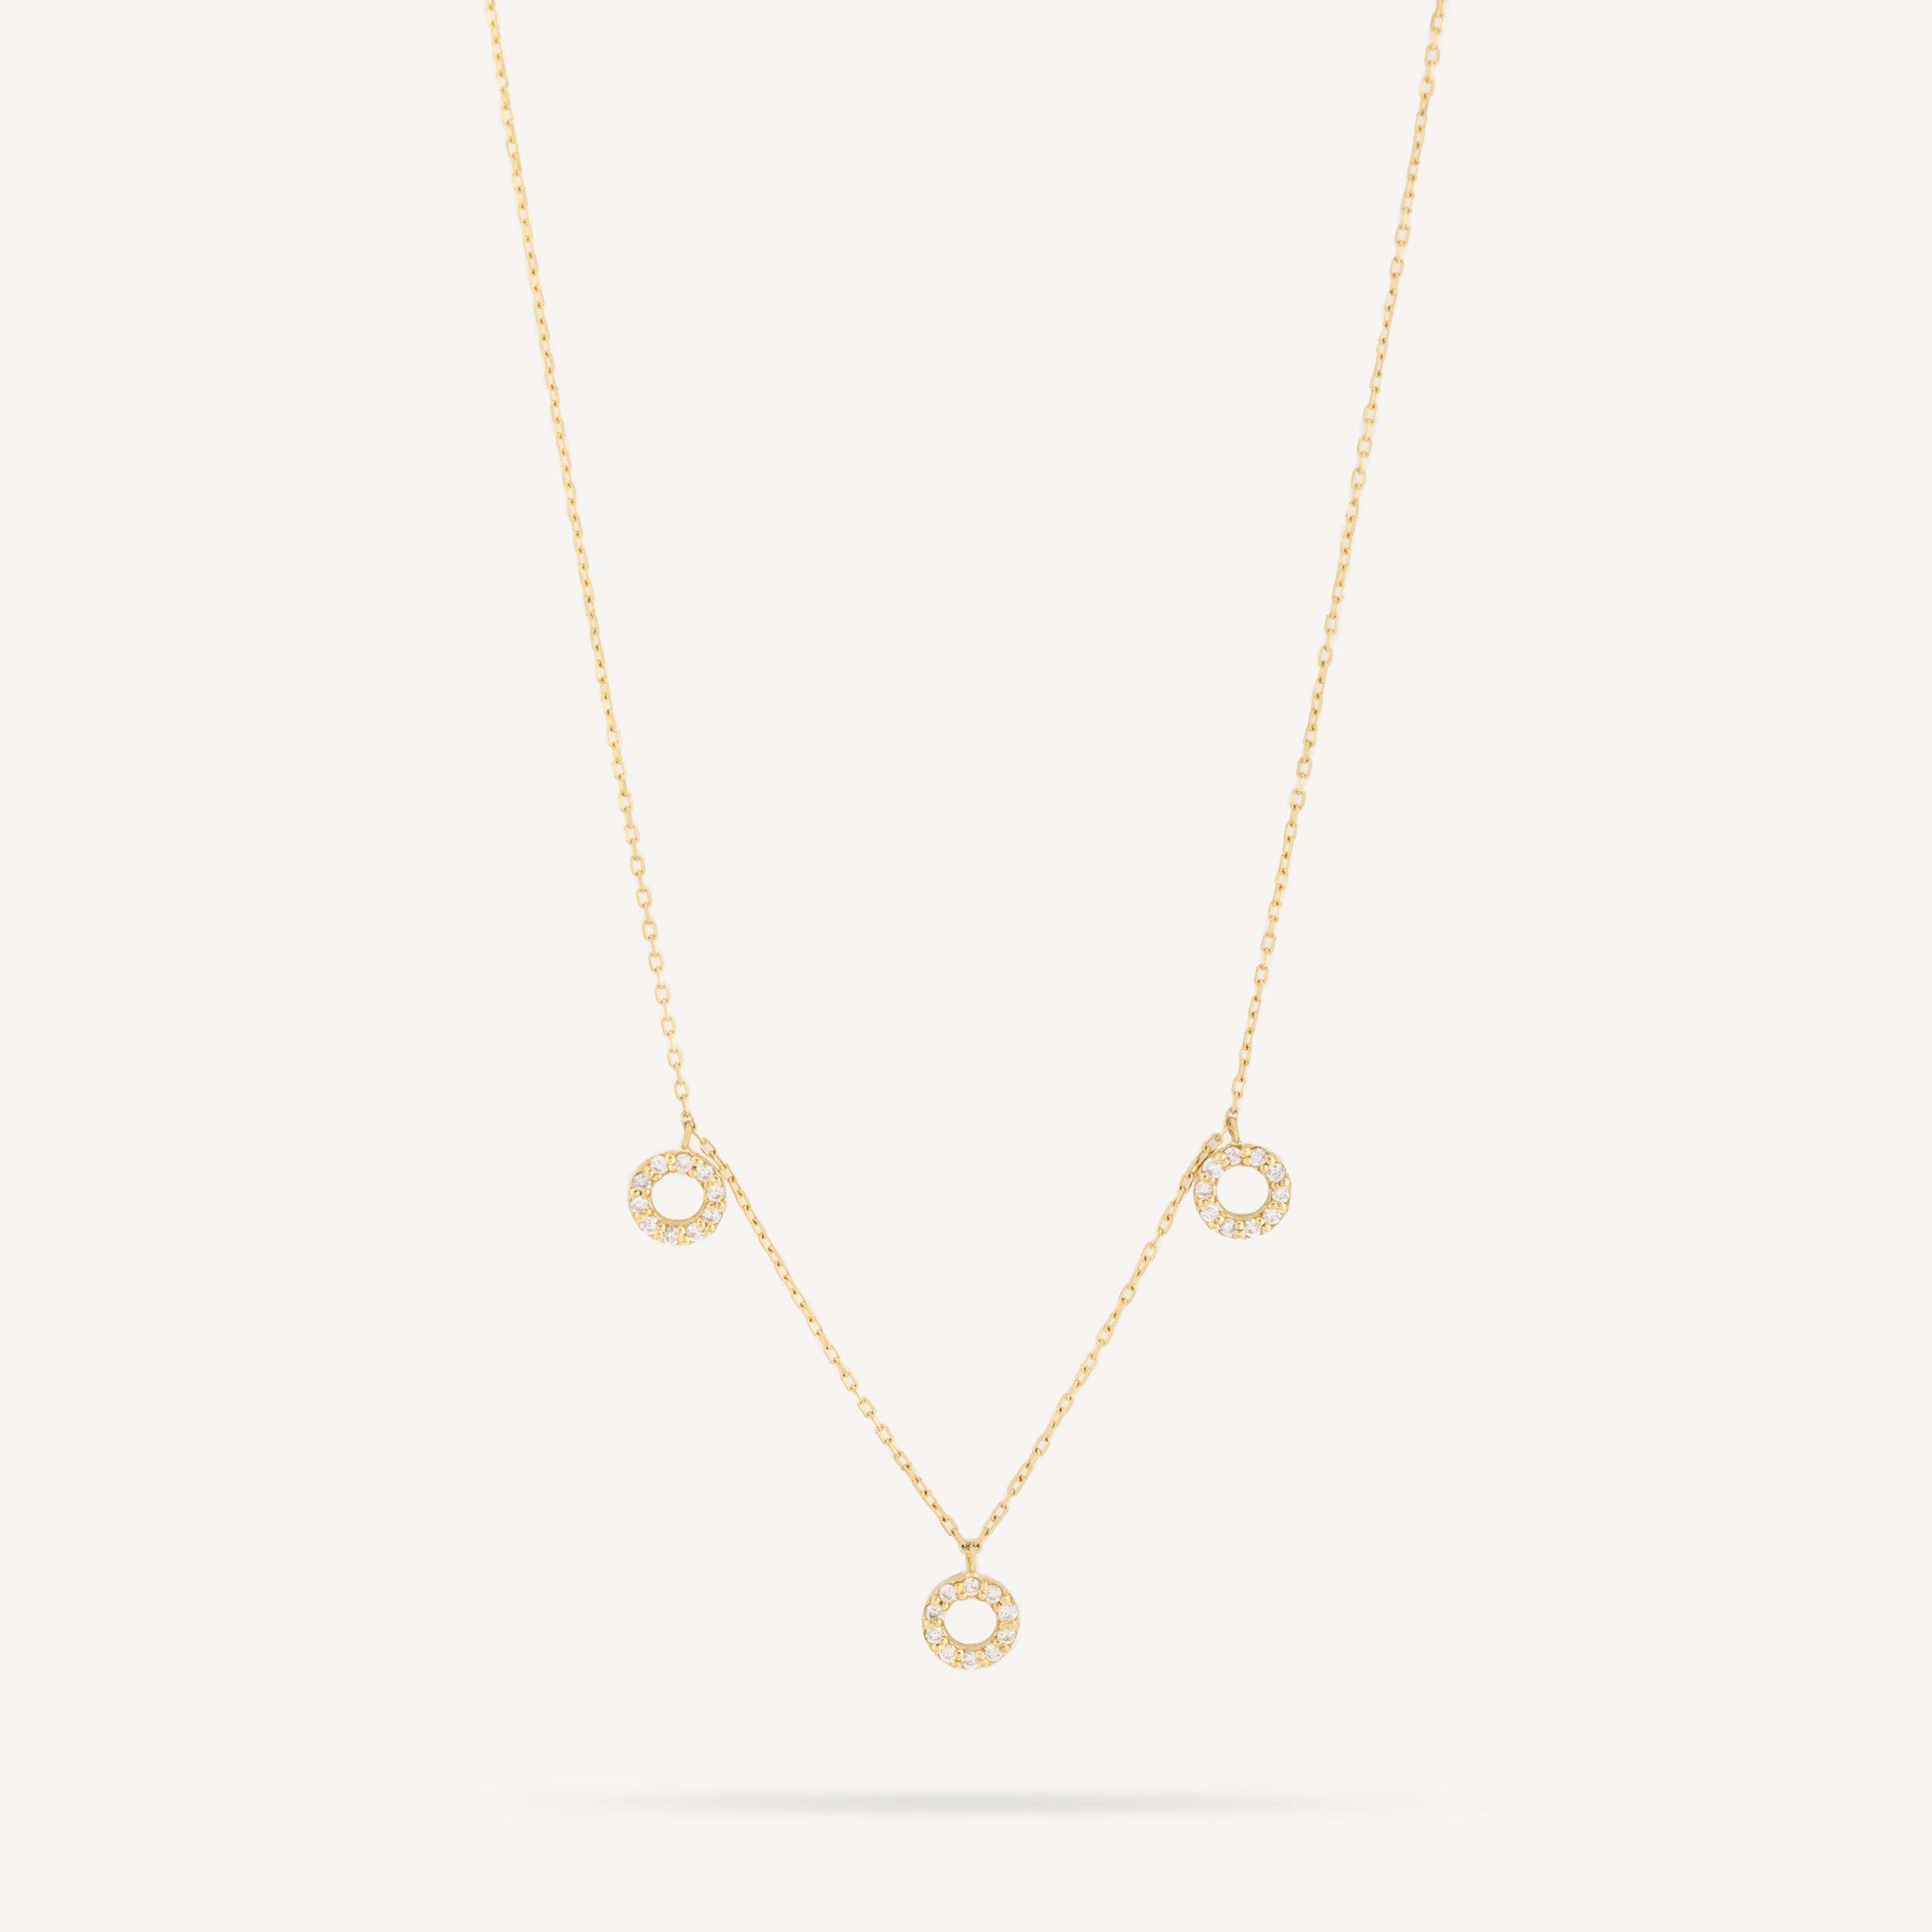 Dangling Circles Yellow Gold Necklace